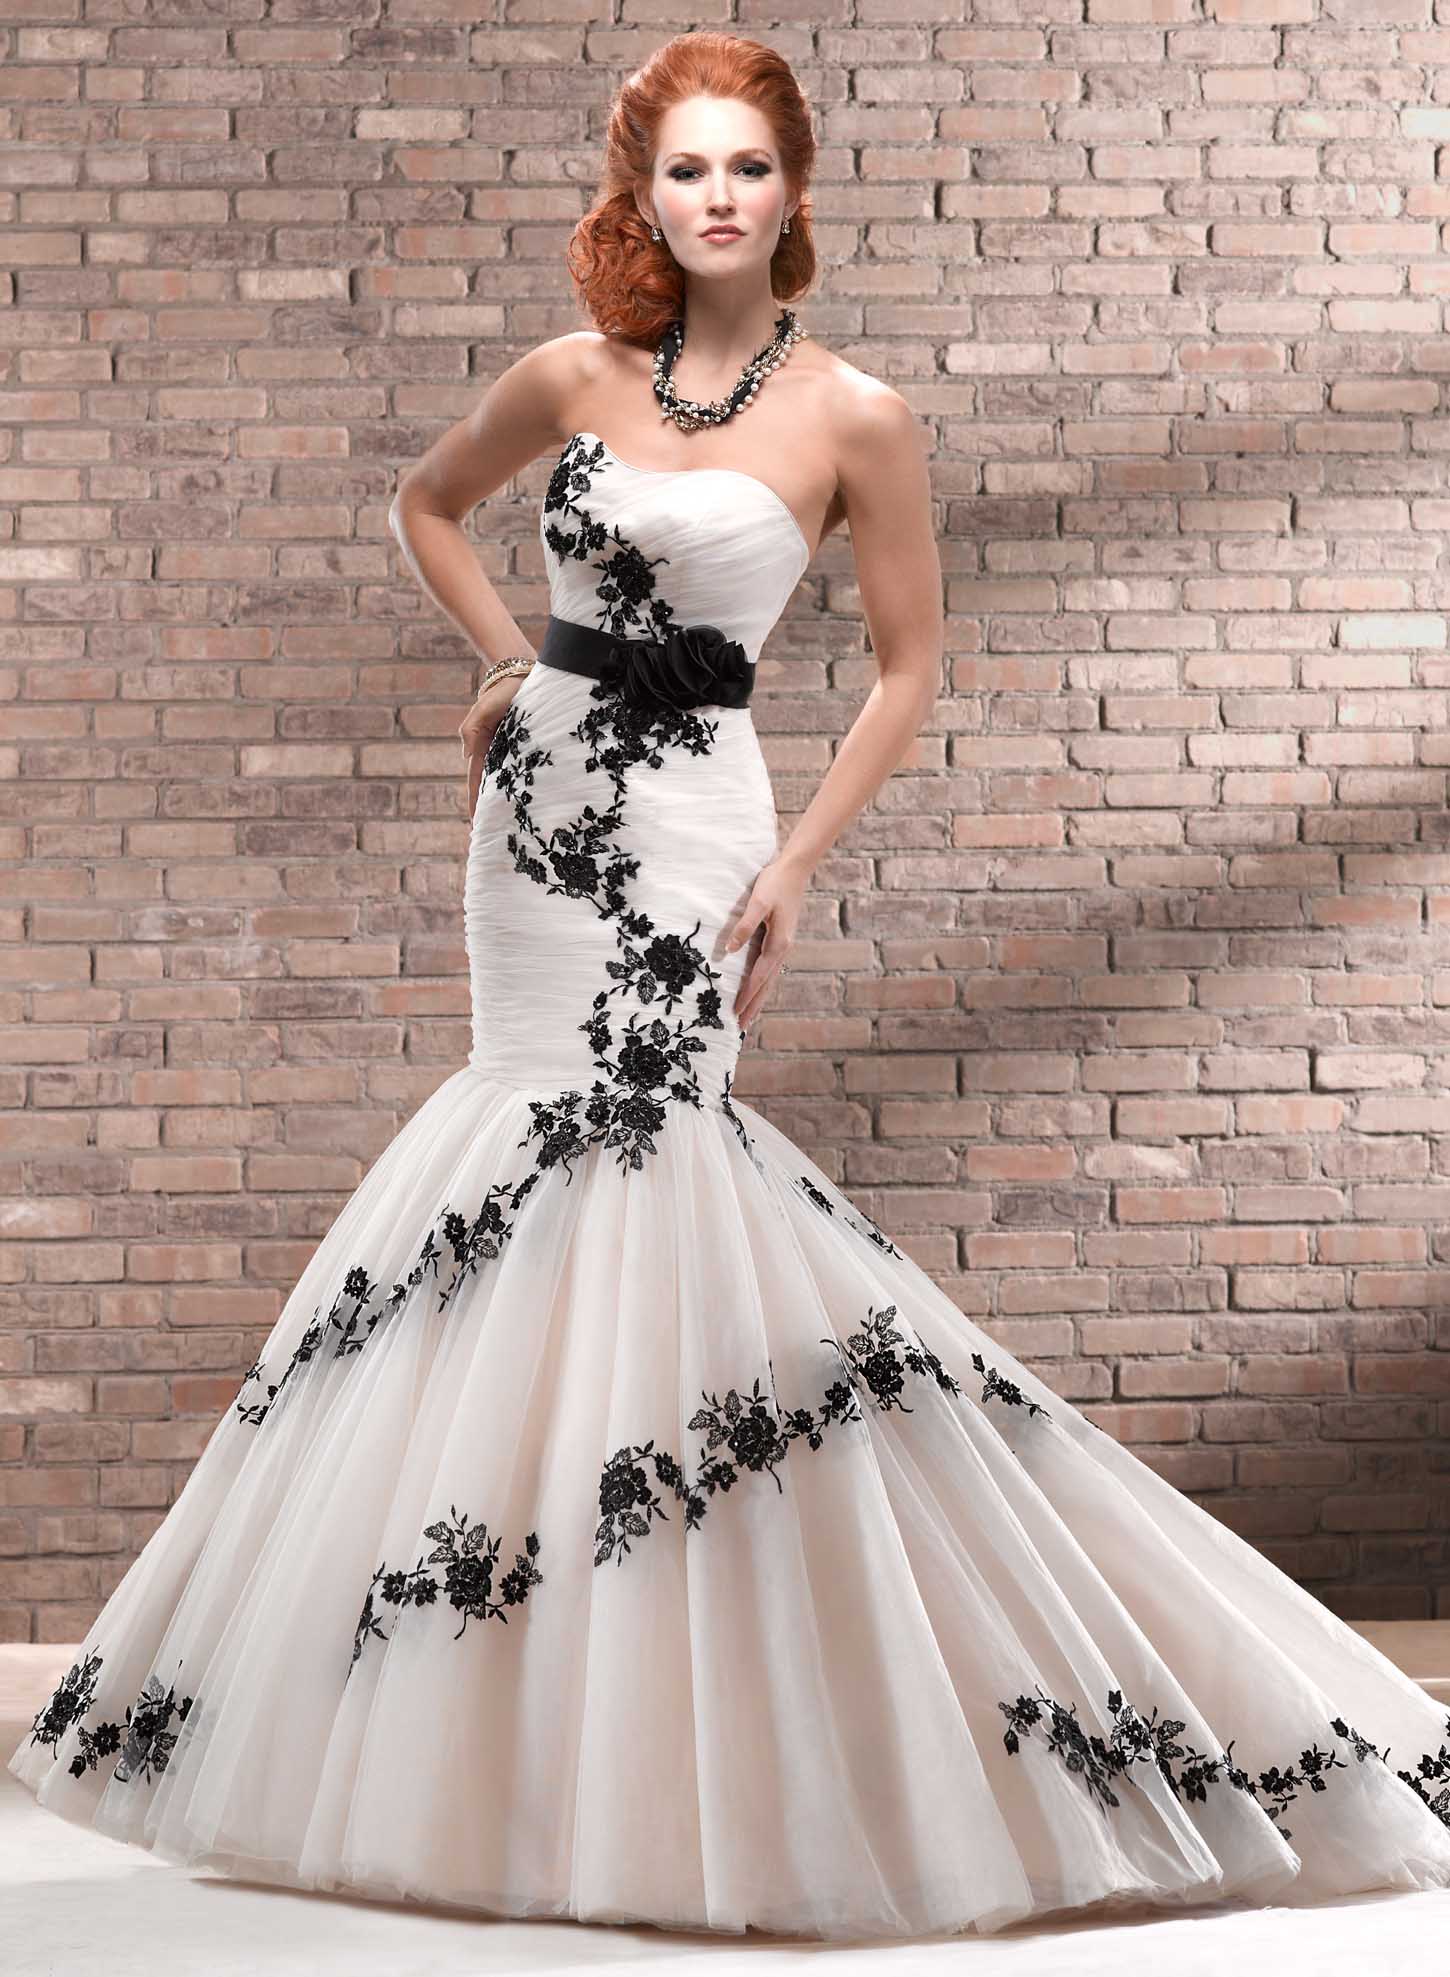 A black and white trumpet dress